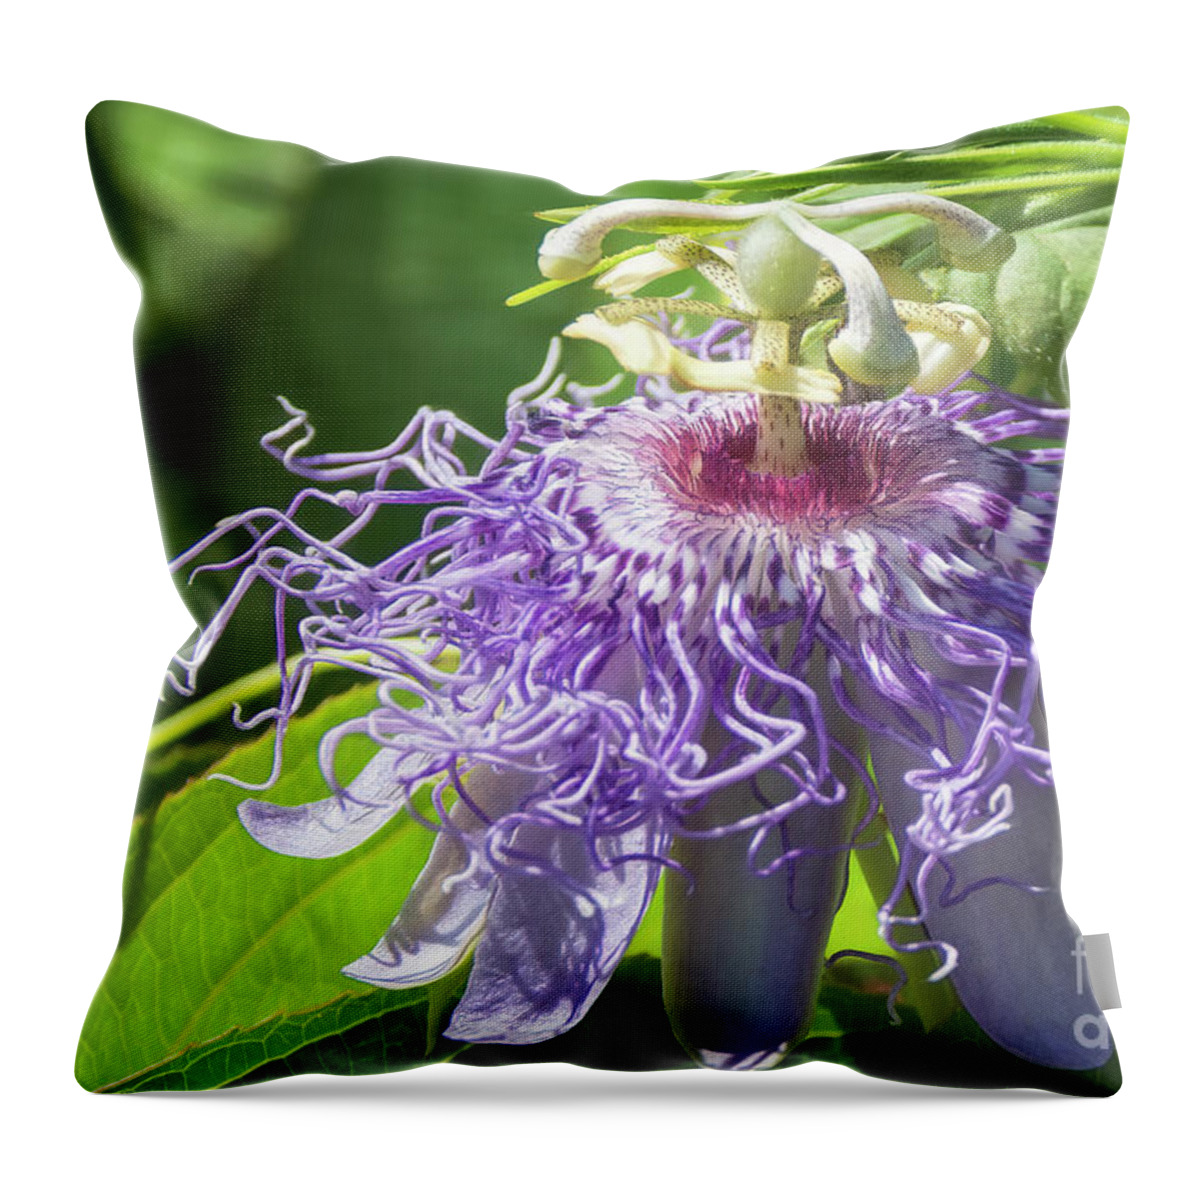 Purple Passion Throw Pillow featuring the photograph Purple Passion by Lorraine Cosgrove